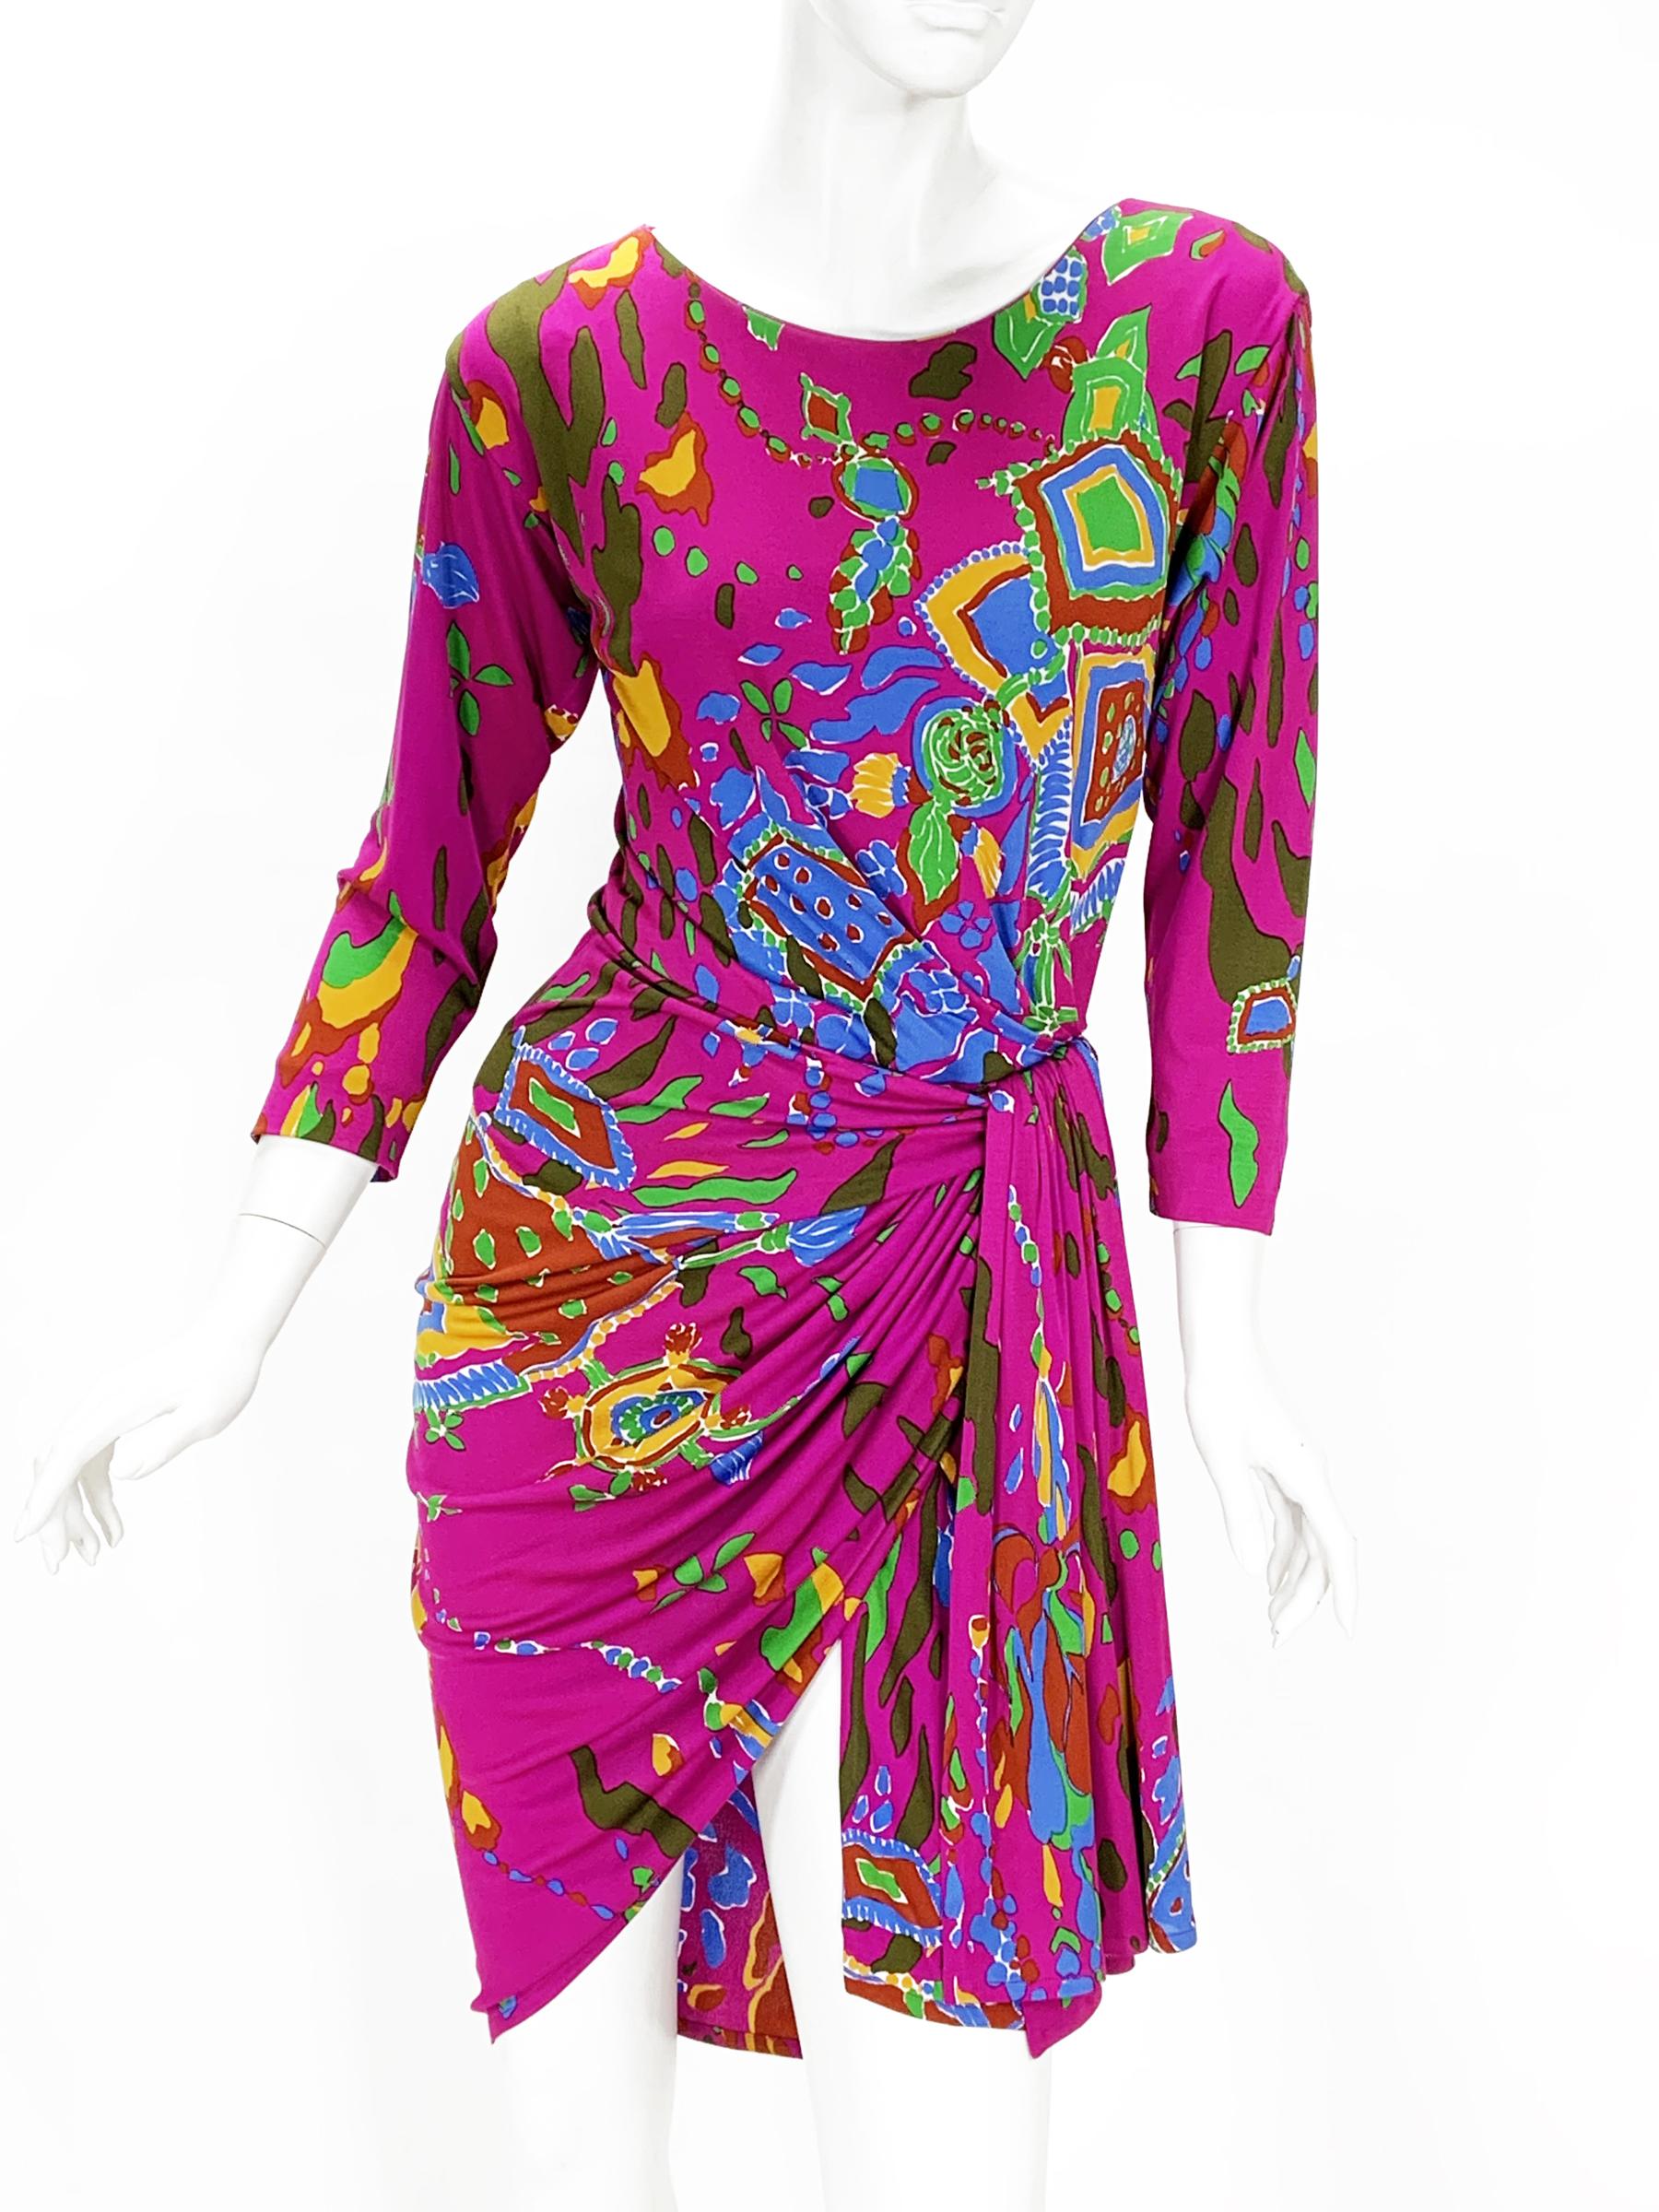 Vintage but New With Tag - Rare and Colorful - Sexy and Playful !!!
Yves Saint Laurent Rive Gauche Jersey Wrap Dress from 80's
French size 38 - US 6
Vibrant colors of fuchsia, yellow, blue, green and orange make us think about hot summer!!!
100%